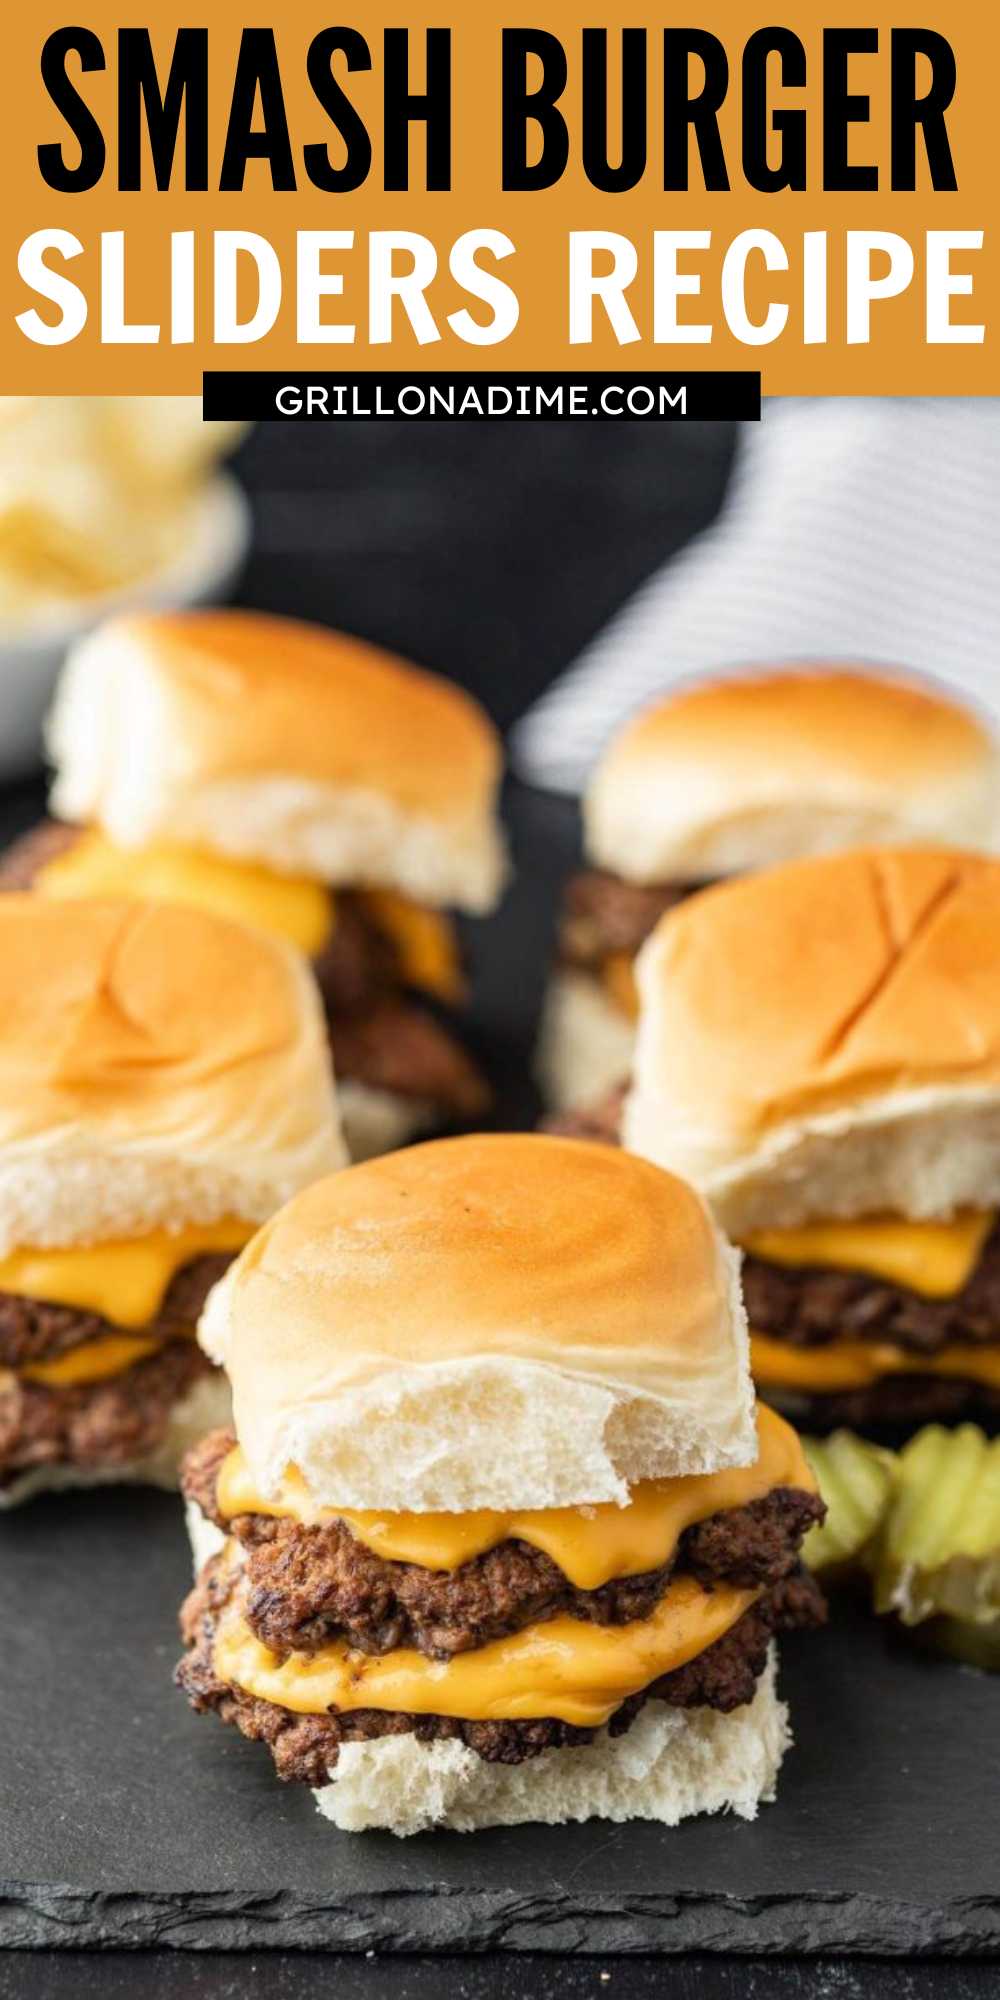 Smash Burger Sliders are perfectly sized and so quick and easy. You can make them on the grill or stove top in less than 15 minutes. It's just fun to eat and the perfect size. Sliders also work great for little hands if you have younger children that might have trouble eating a larger burger. #eatingonadime #smashburgersliders #sliders #smashburgers